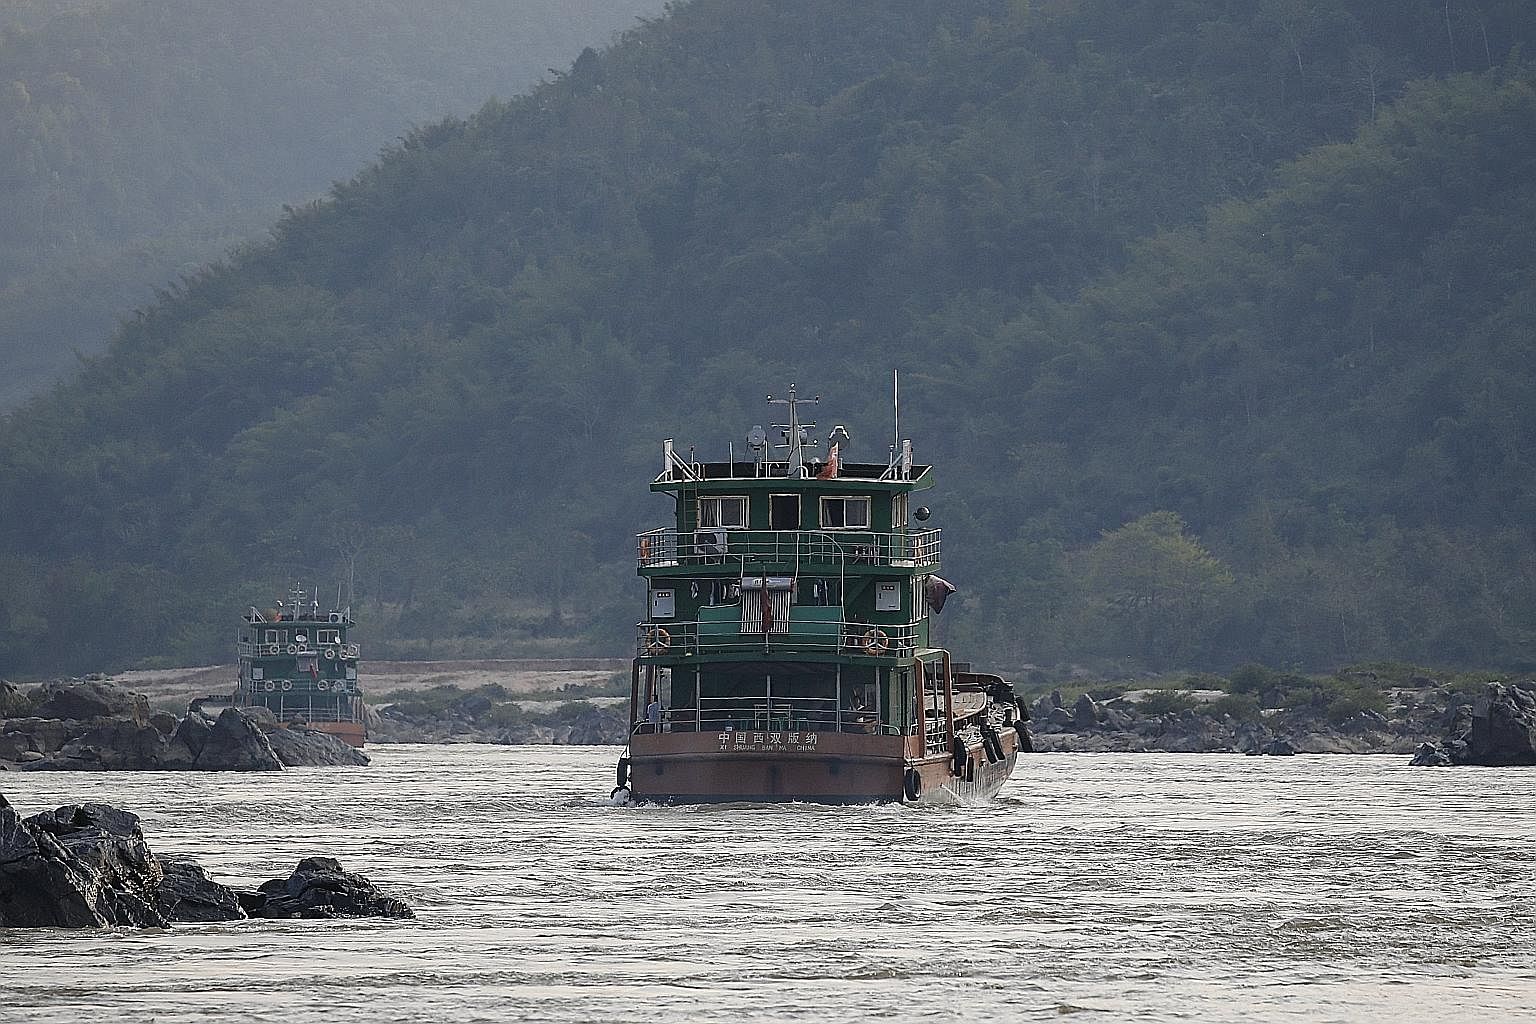 Chinese cargo ships on the Mekong River. Last week, Chinese Premier Li Keqiang offered the five Asean countries along the Mekong River US$11.5 billion (S$15.5 billion) in loans and credit for infrastructure and other projects.